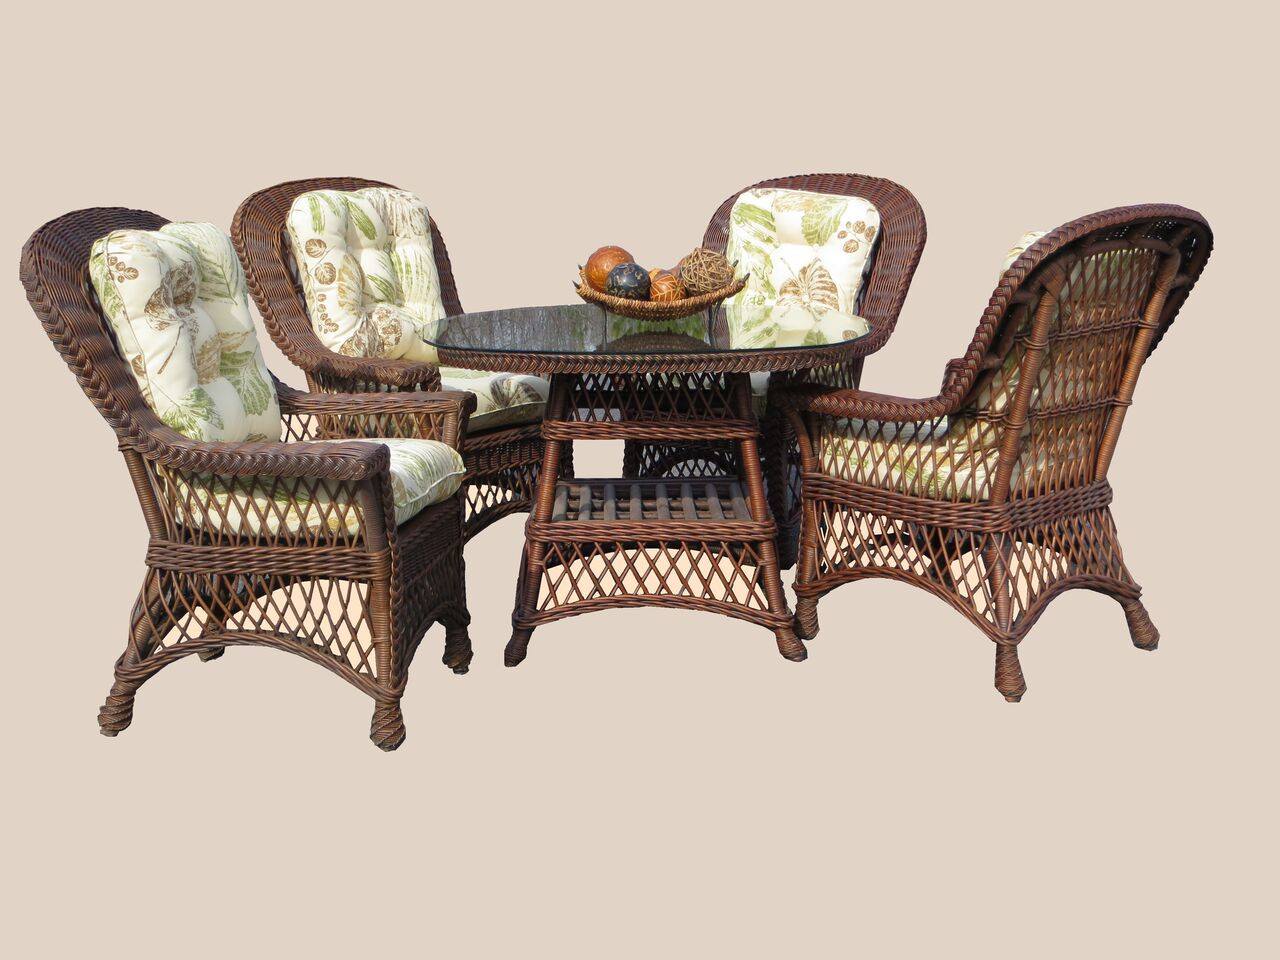 Spice Islands Spice Islands Bar Harbor Dining Table With Glass Top - 42" Dining Table - Rattan Imports